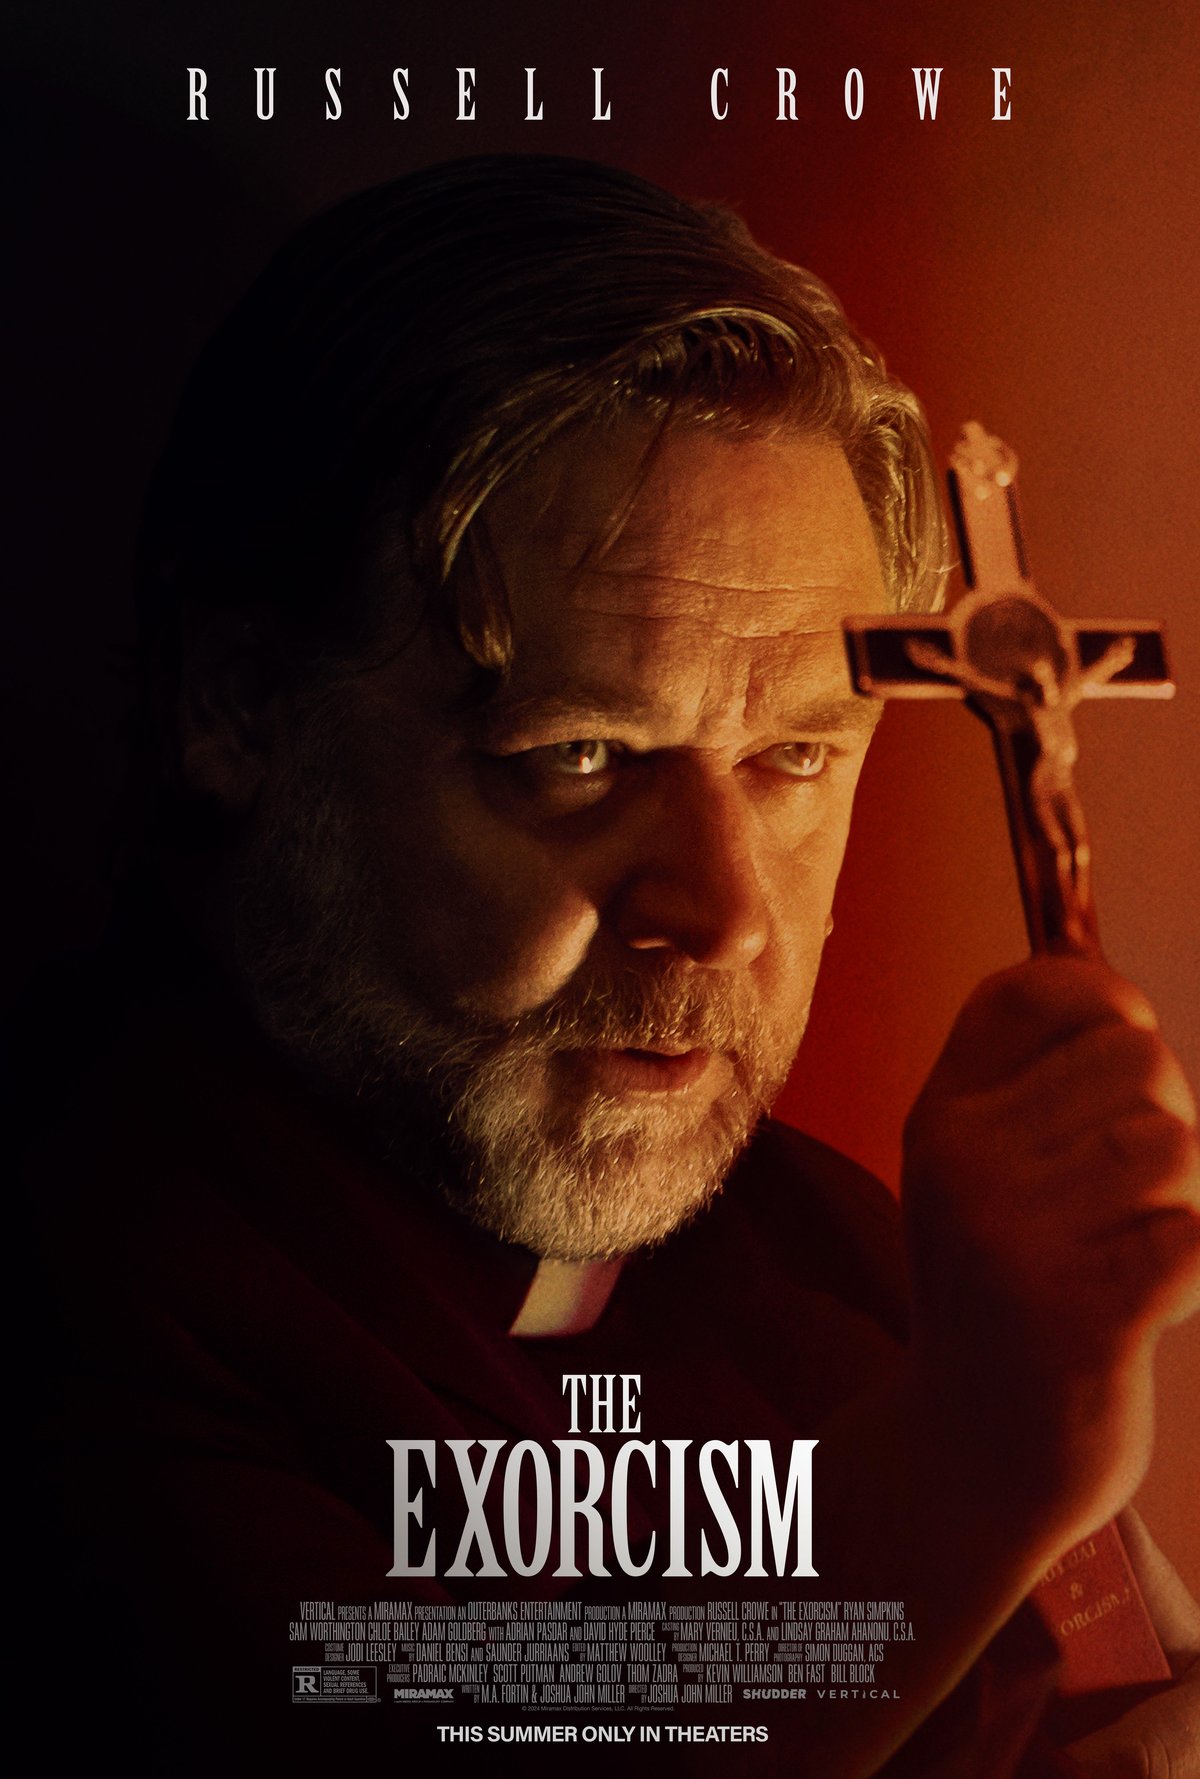 The Exorcism movie poster